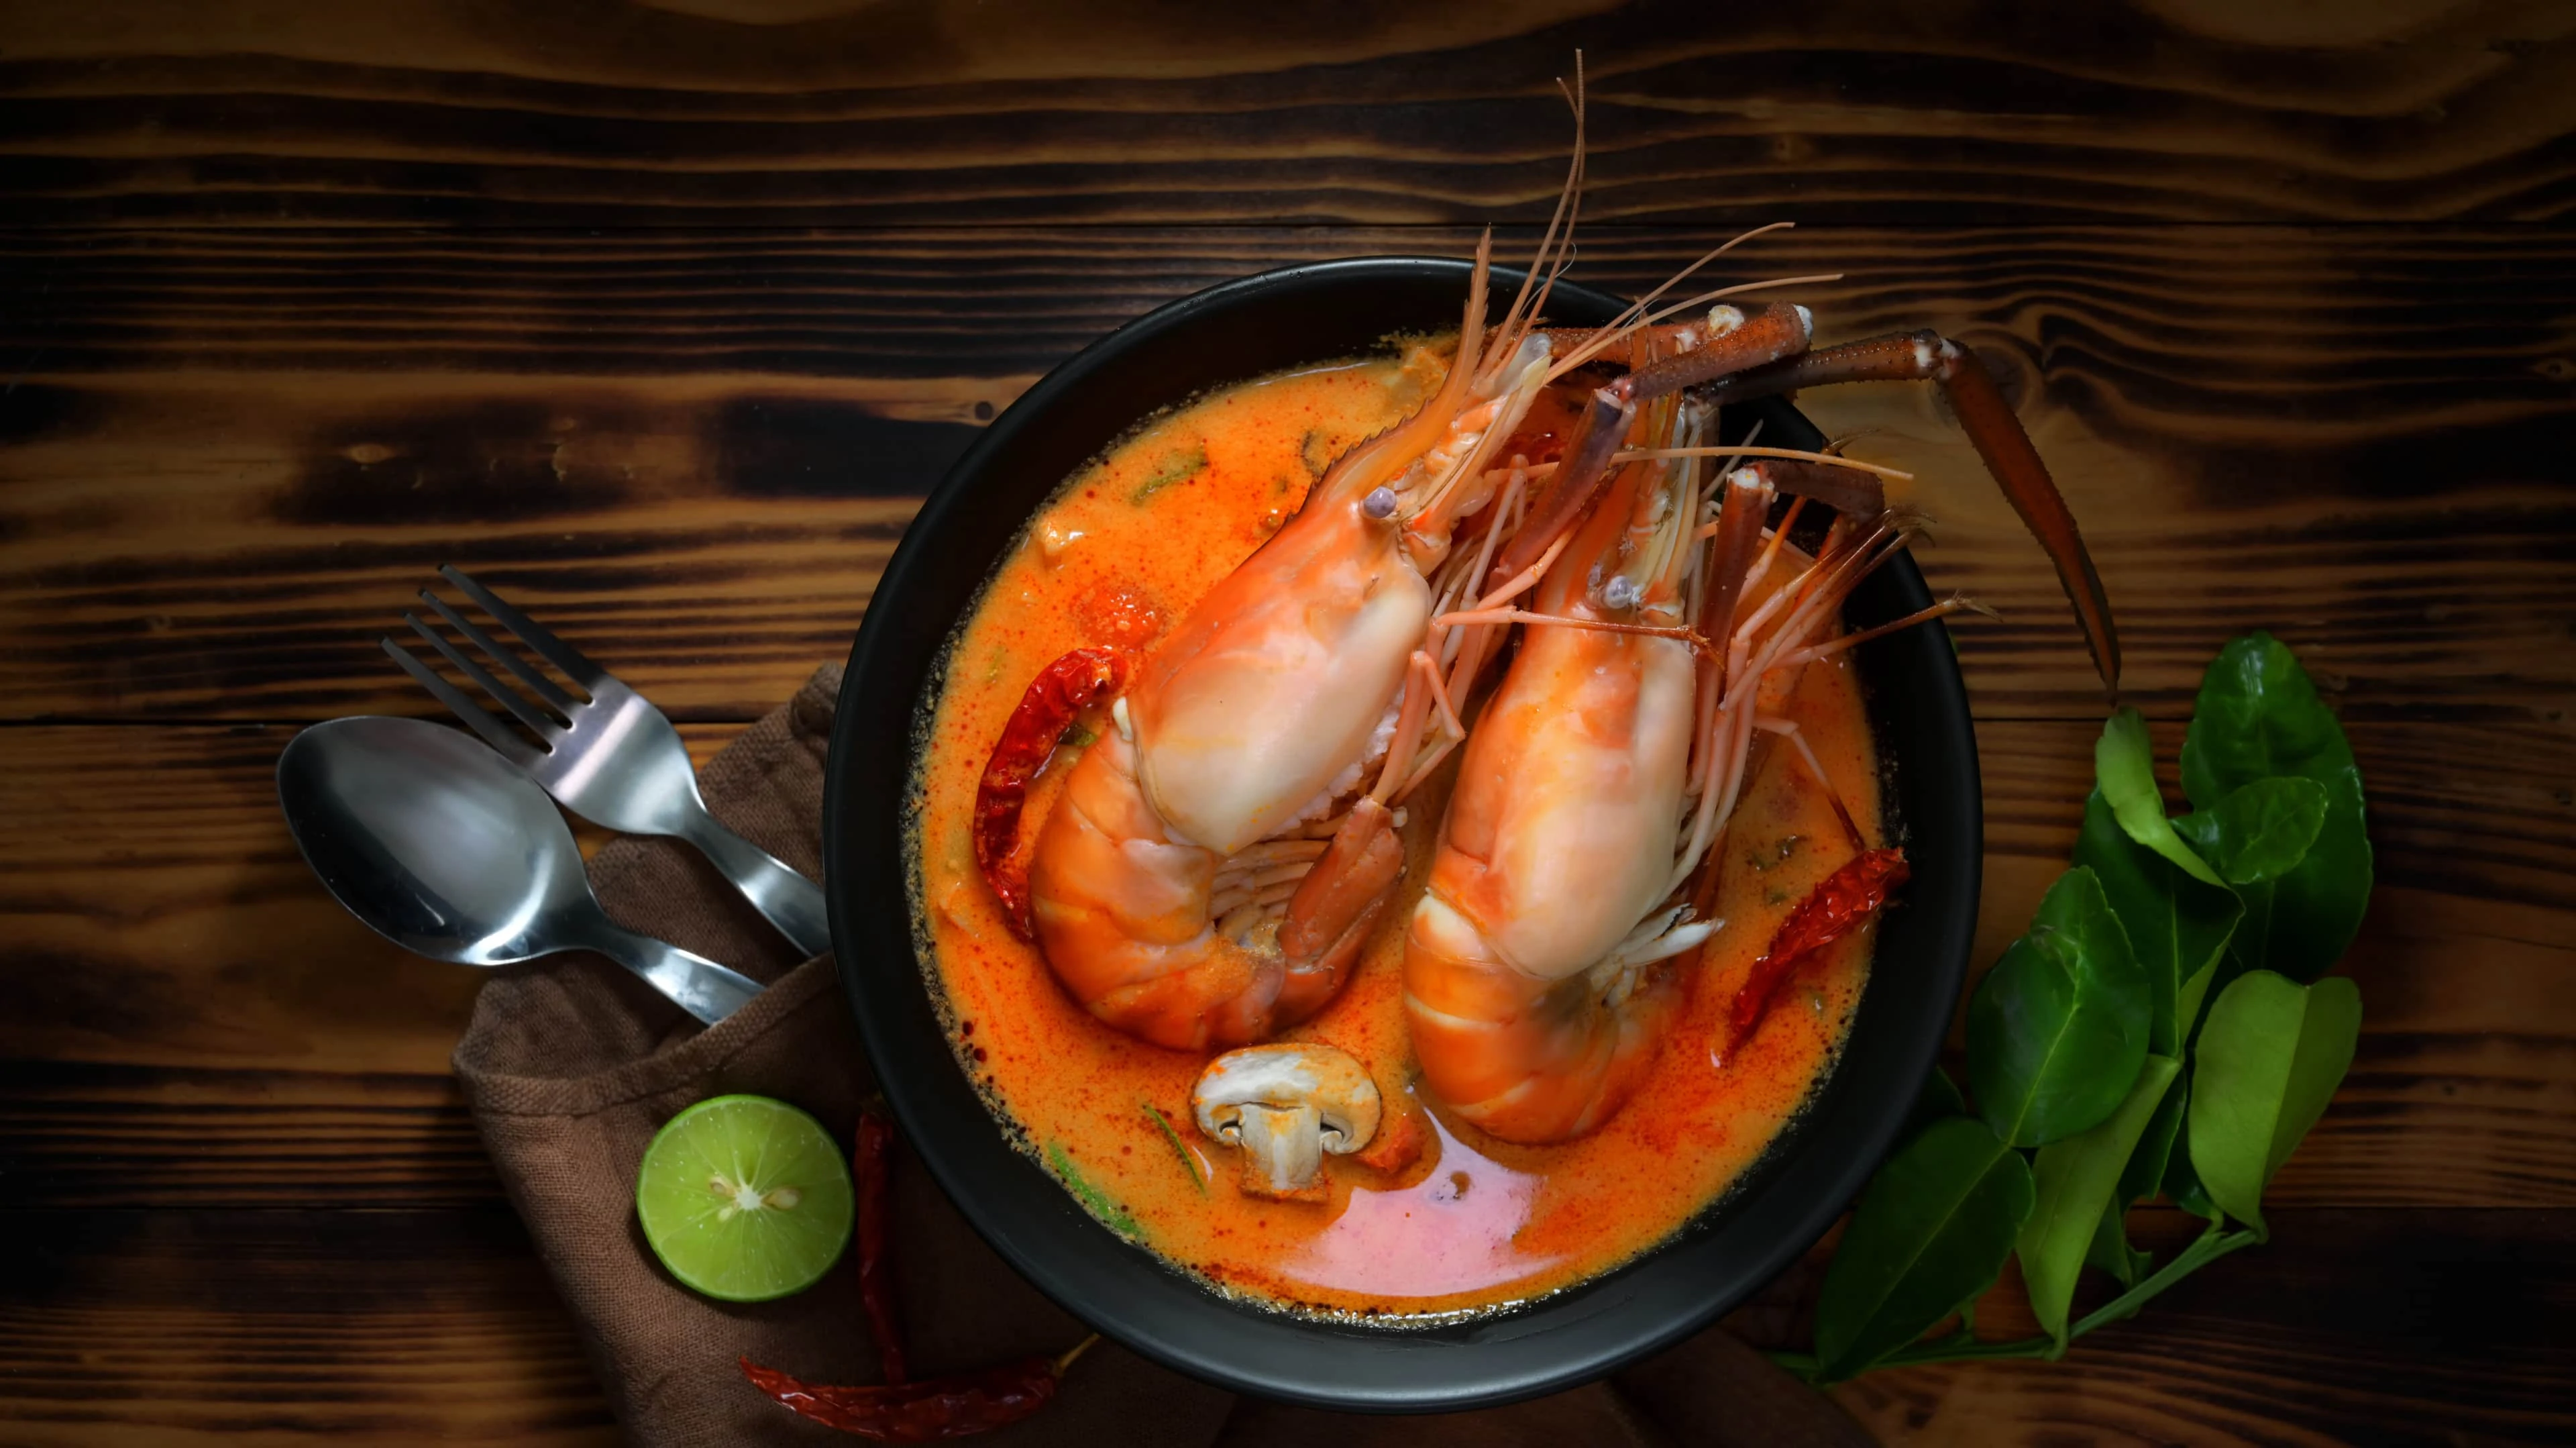 Top view of Tom yum goong with prawns, spicy soup in black bowl on wooden table